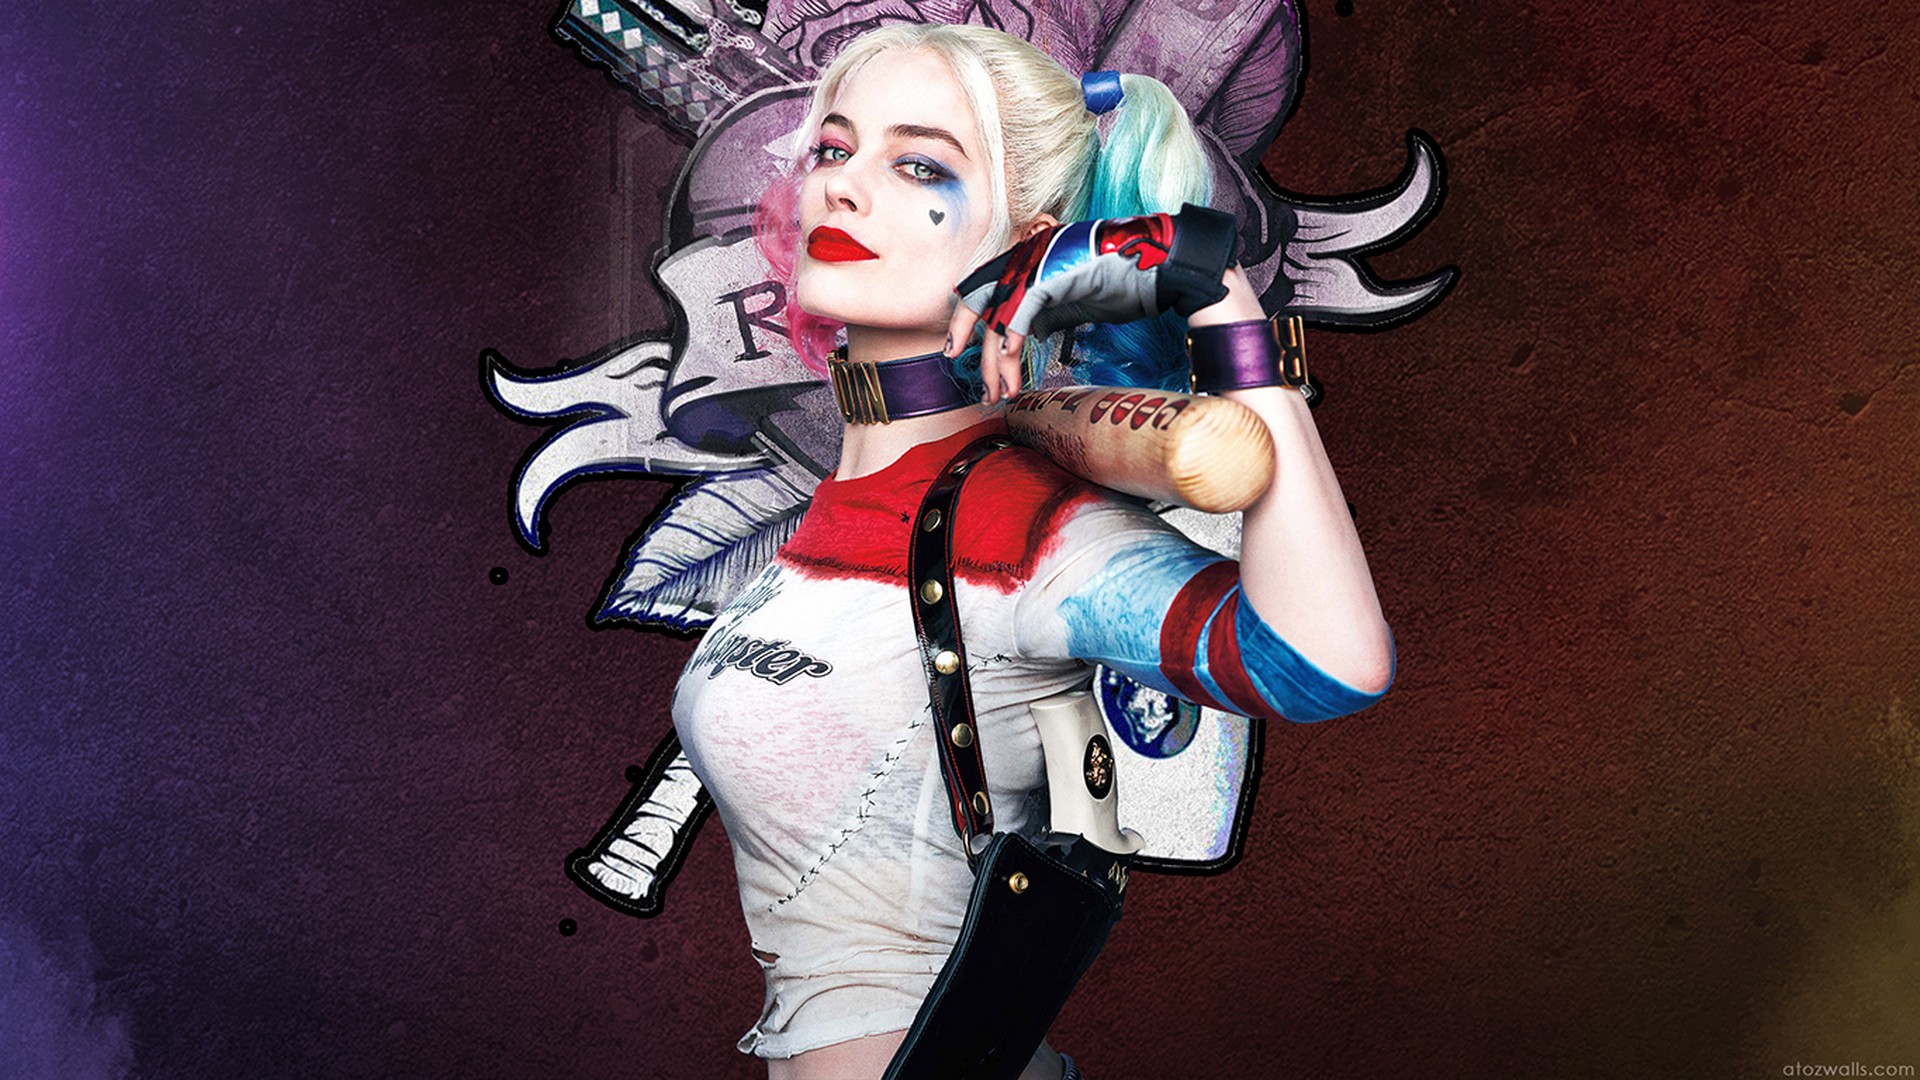 Desktop Wallpaper Harley Quinn with resolution 1920X1080 pixel. You can use this wallpaper as background for your desktop Computer Screensavers, Android or iPhone smartphones